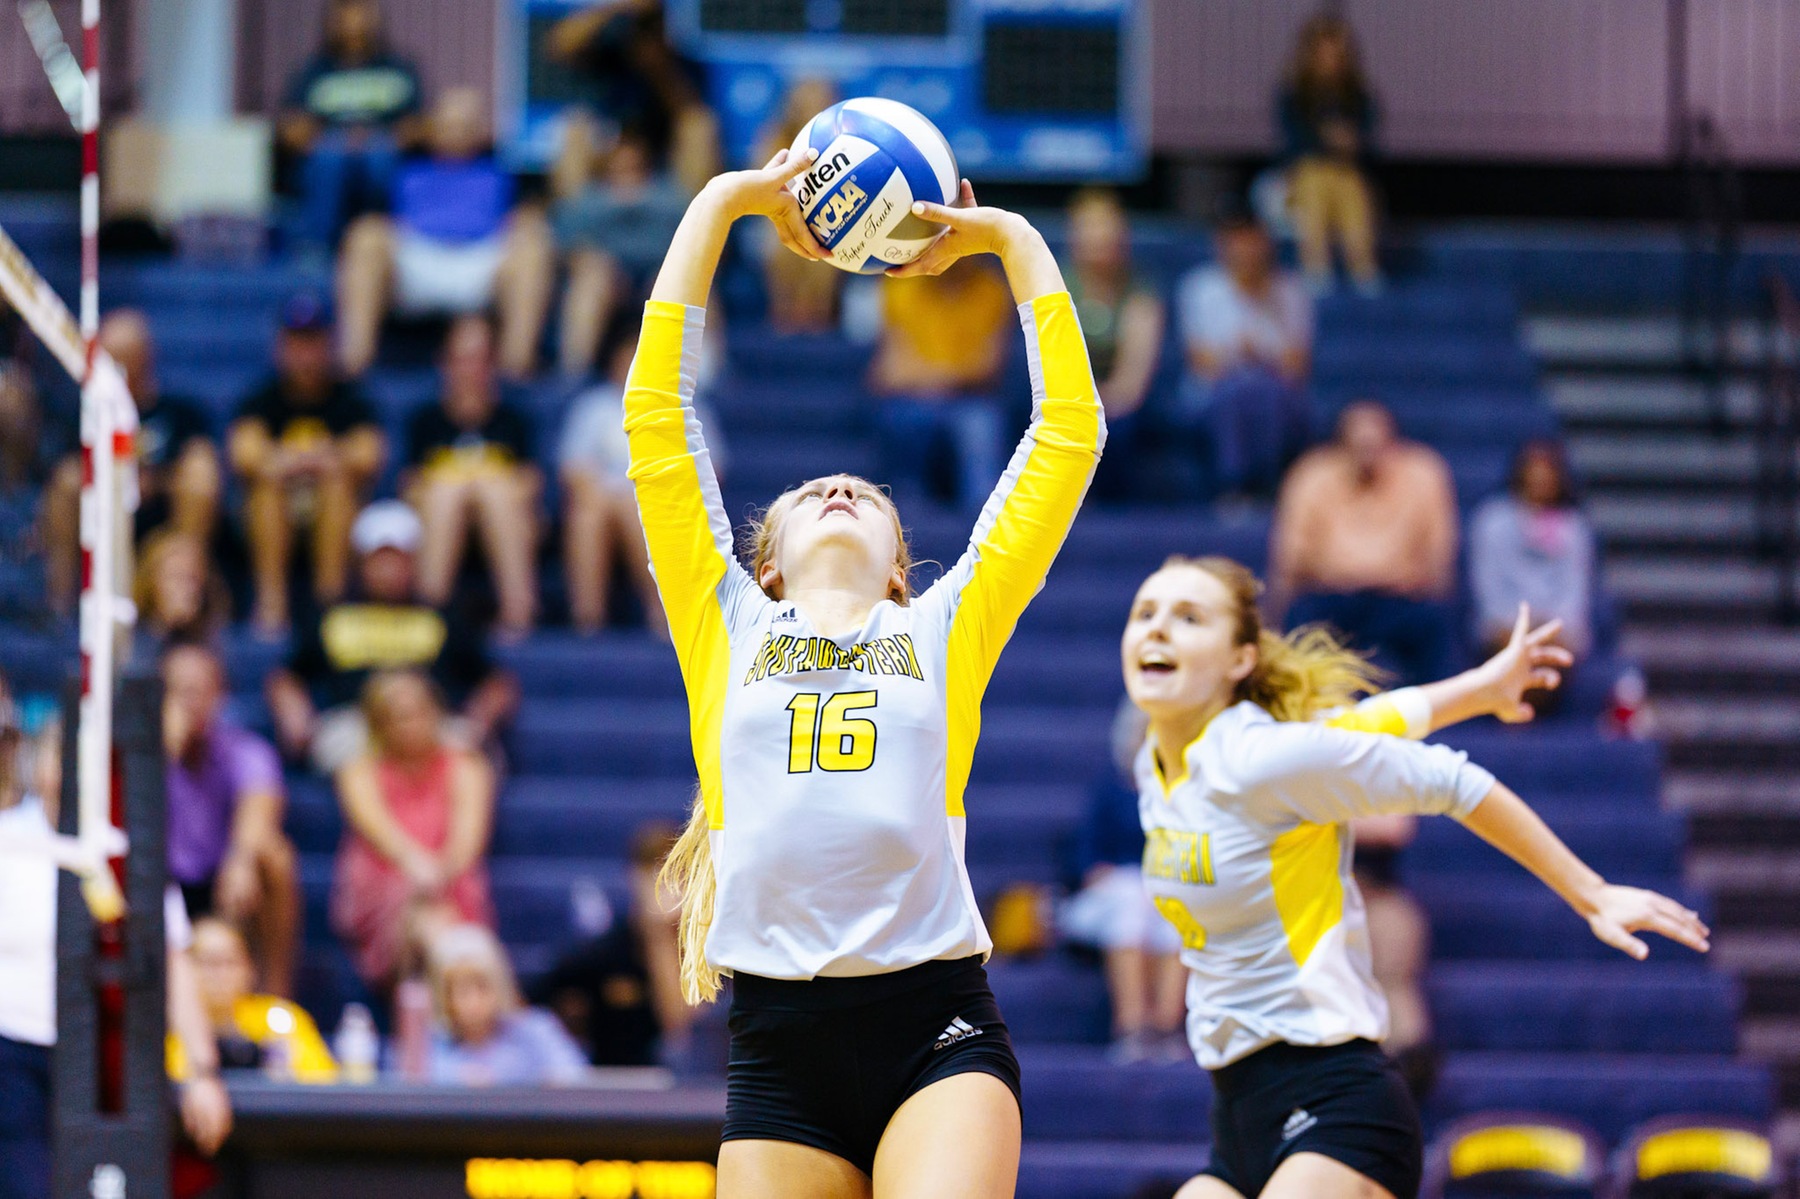 Volleyball Drops Second Match of the Day, Falls to Whitworth